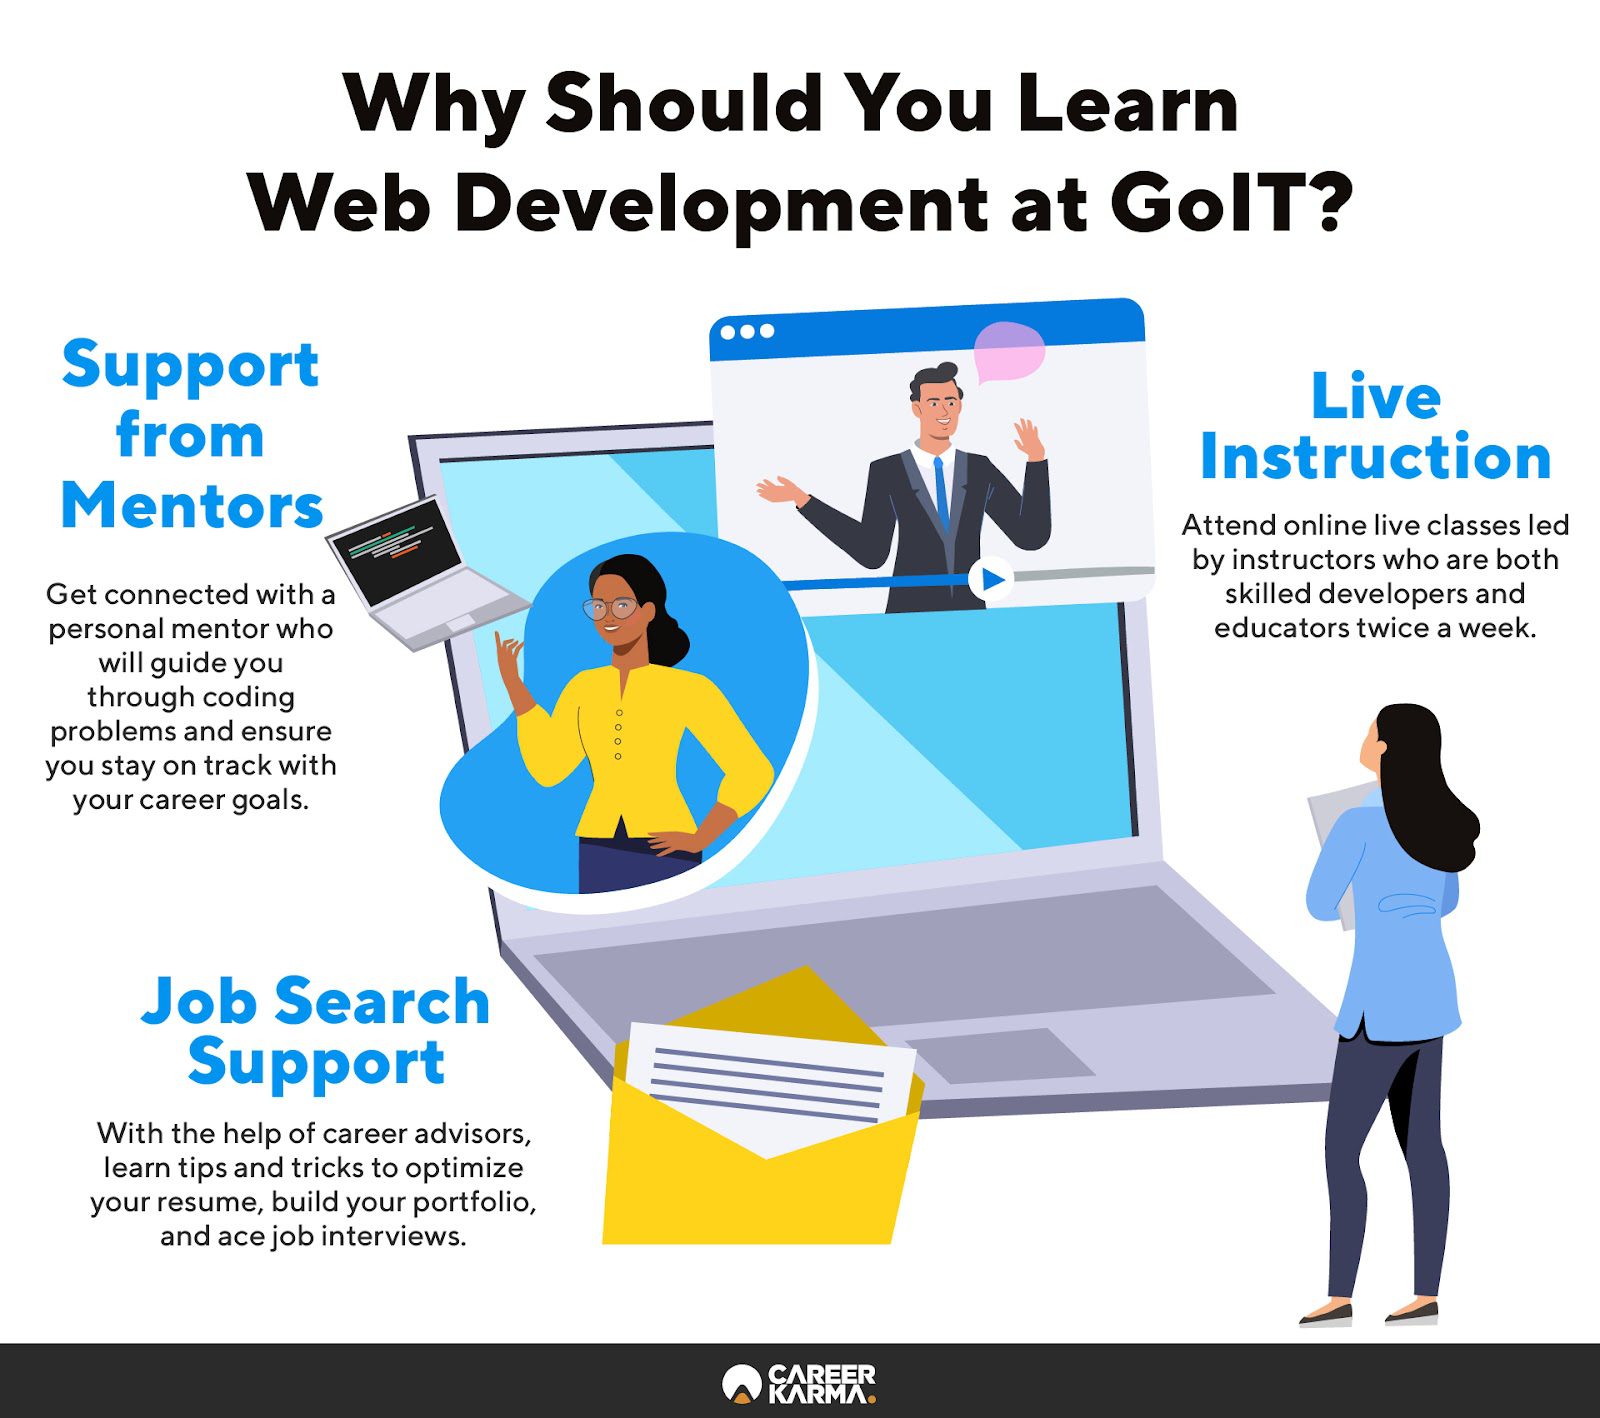 An infographic highlighting why you should learn web development at GoIT